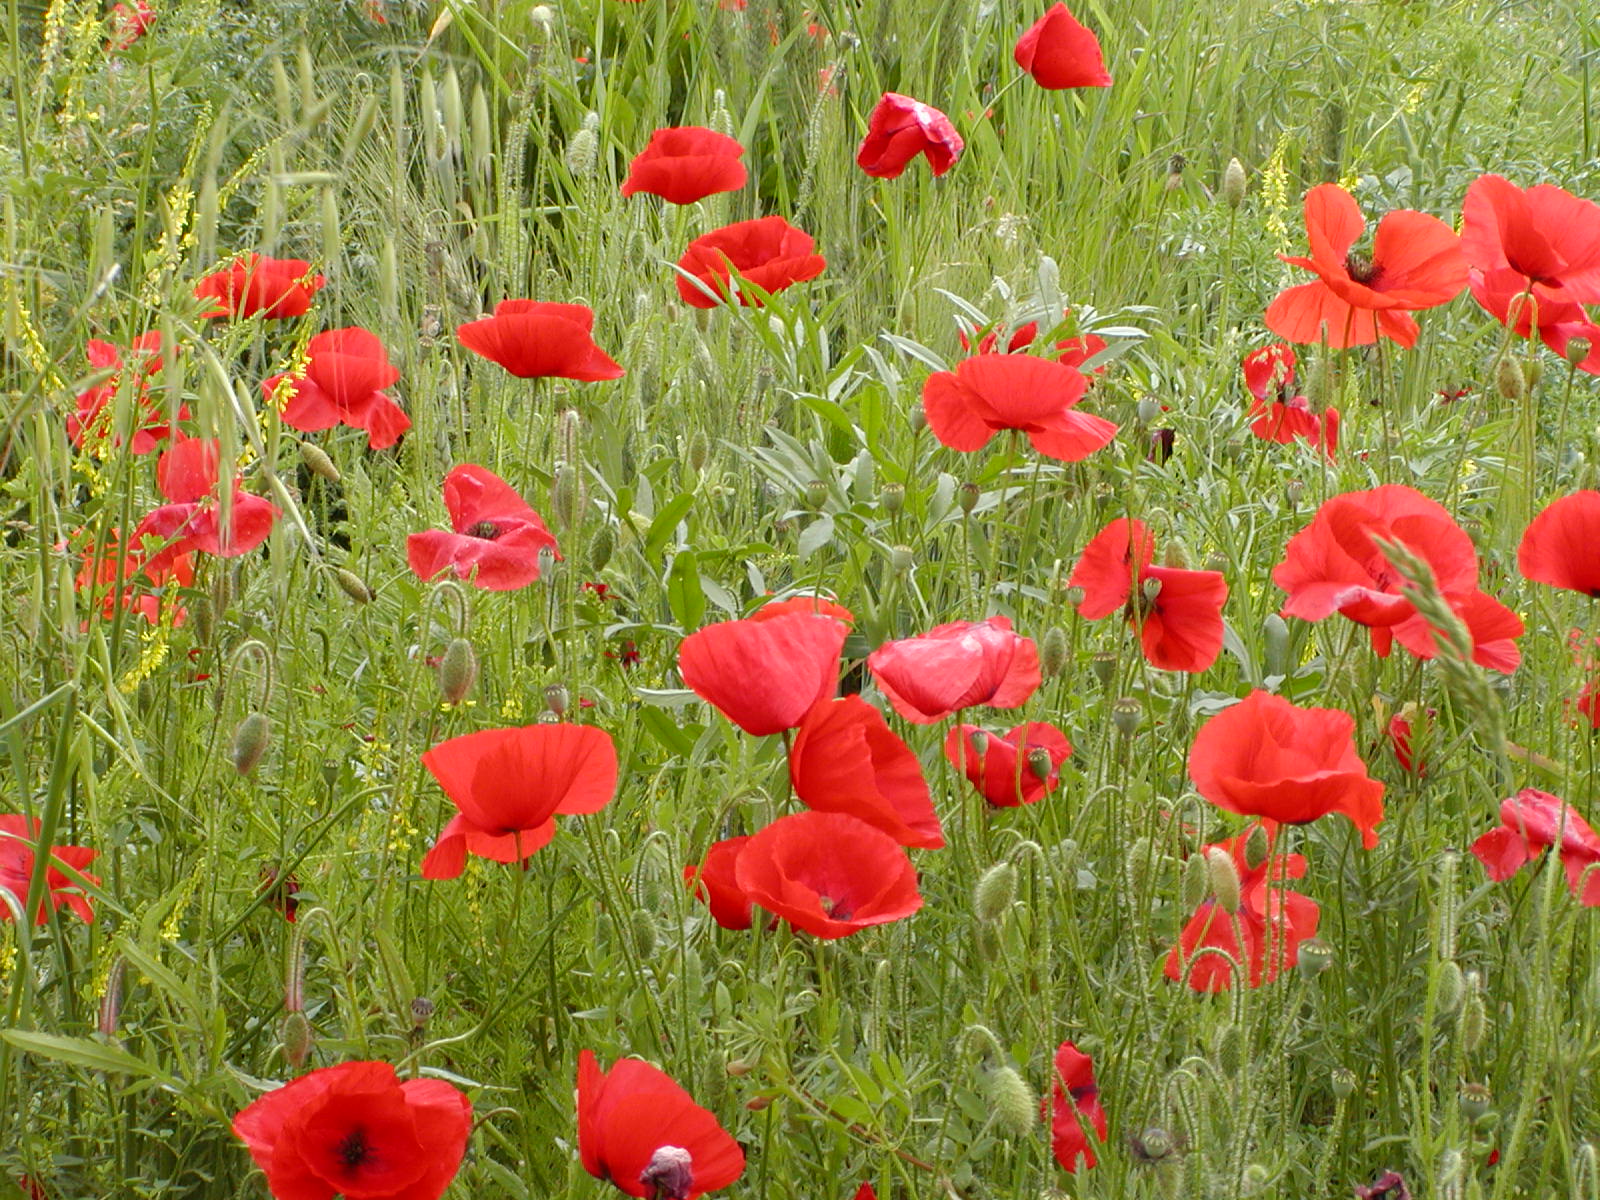 Oh, the poppies...